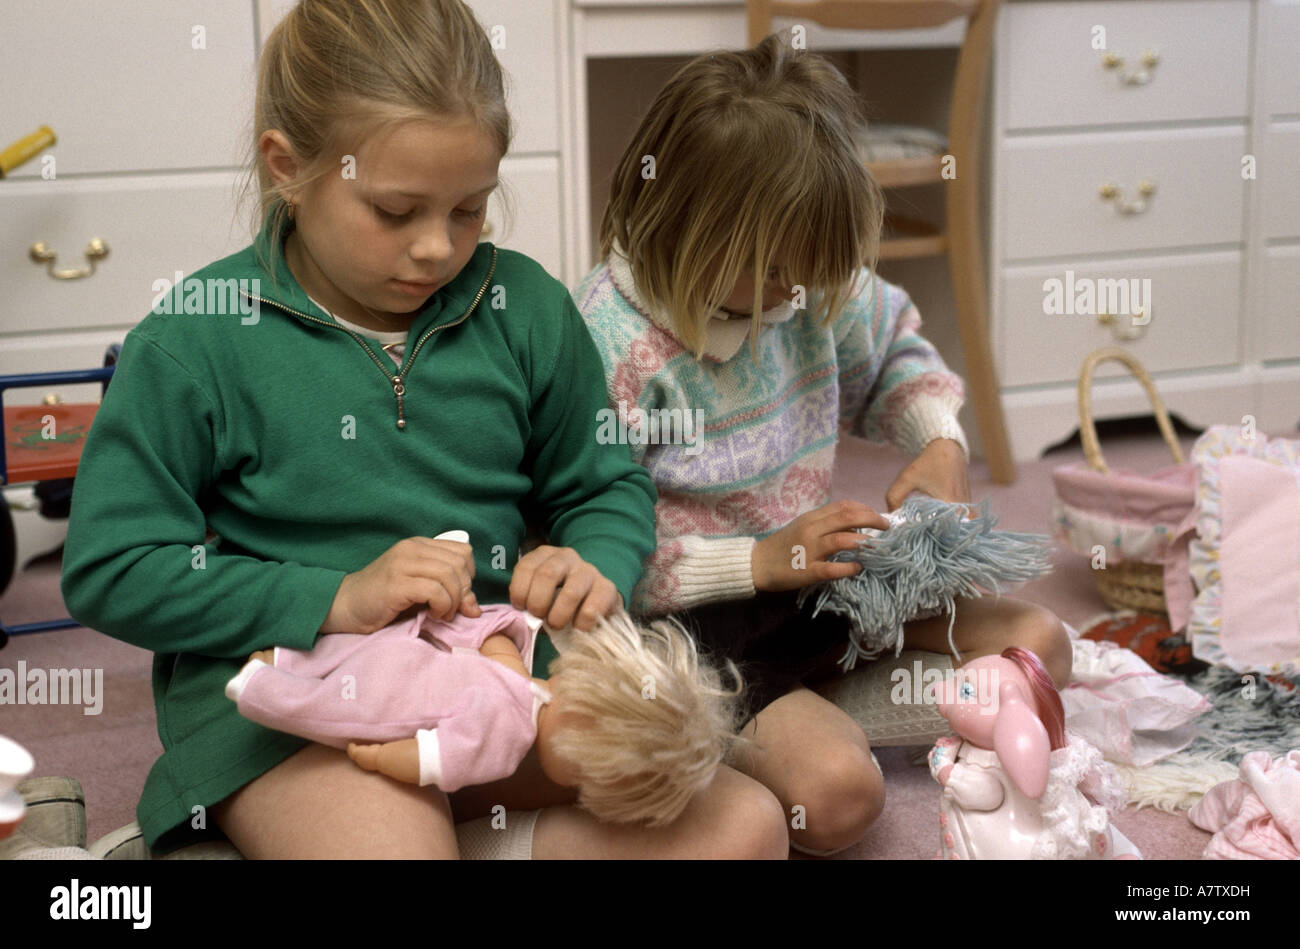 young girls playing with dolls Stock Photo